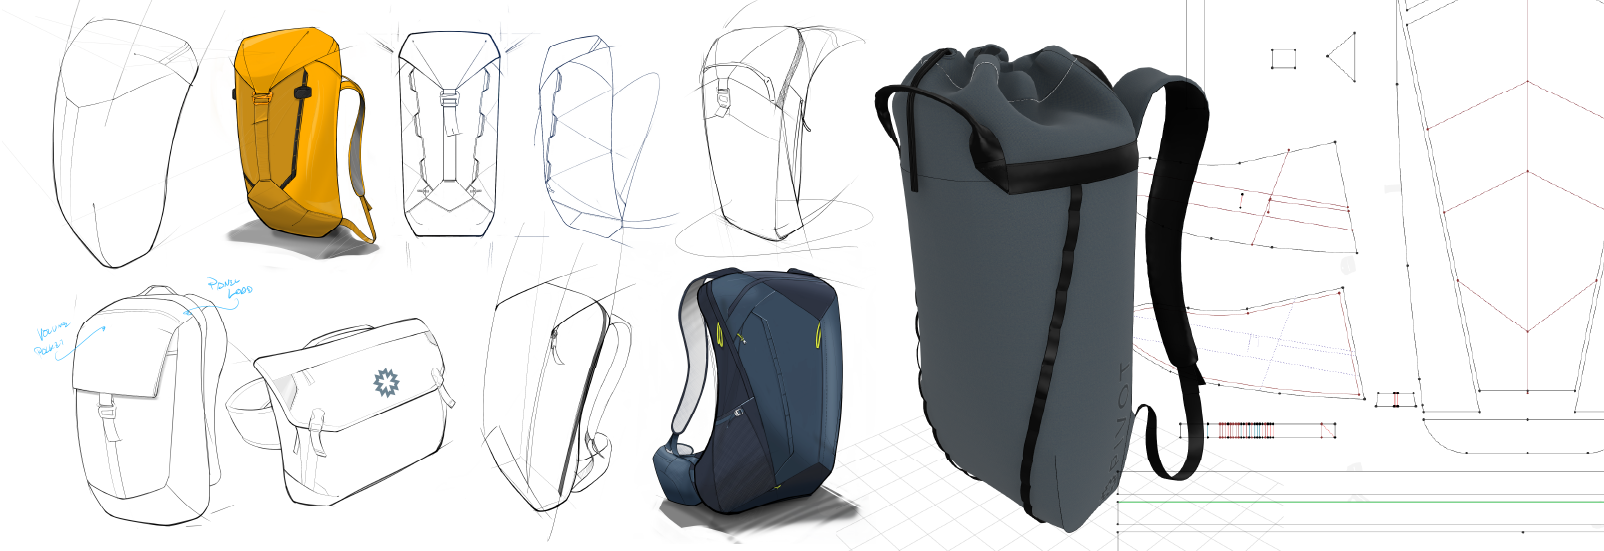 Sketching a new bag. Promotional products for your brand or event.